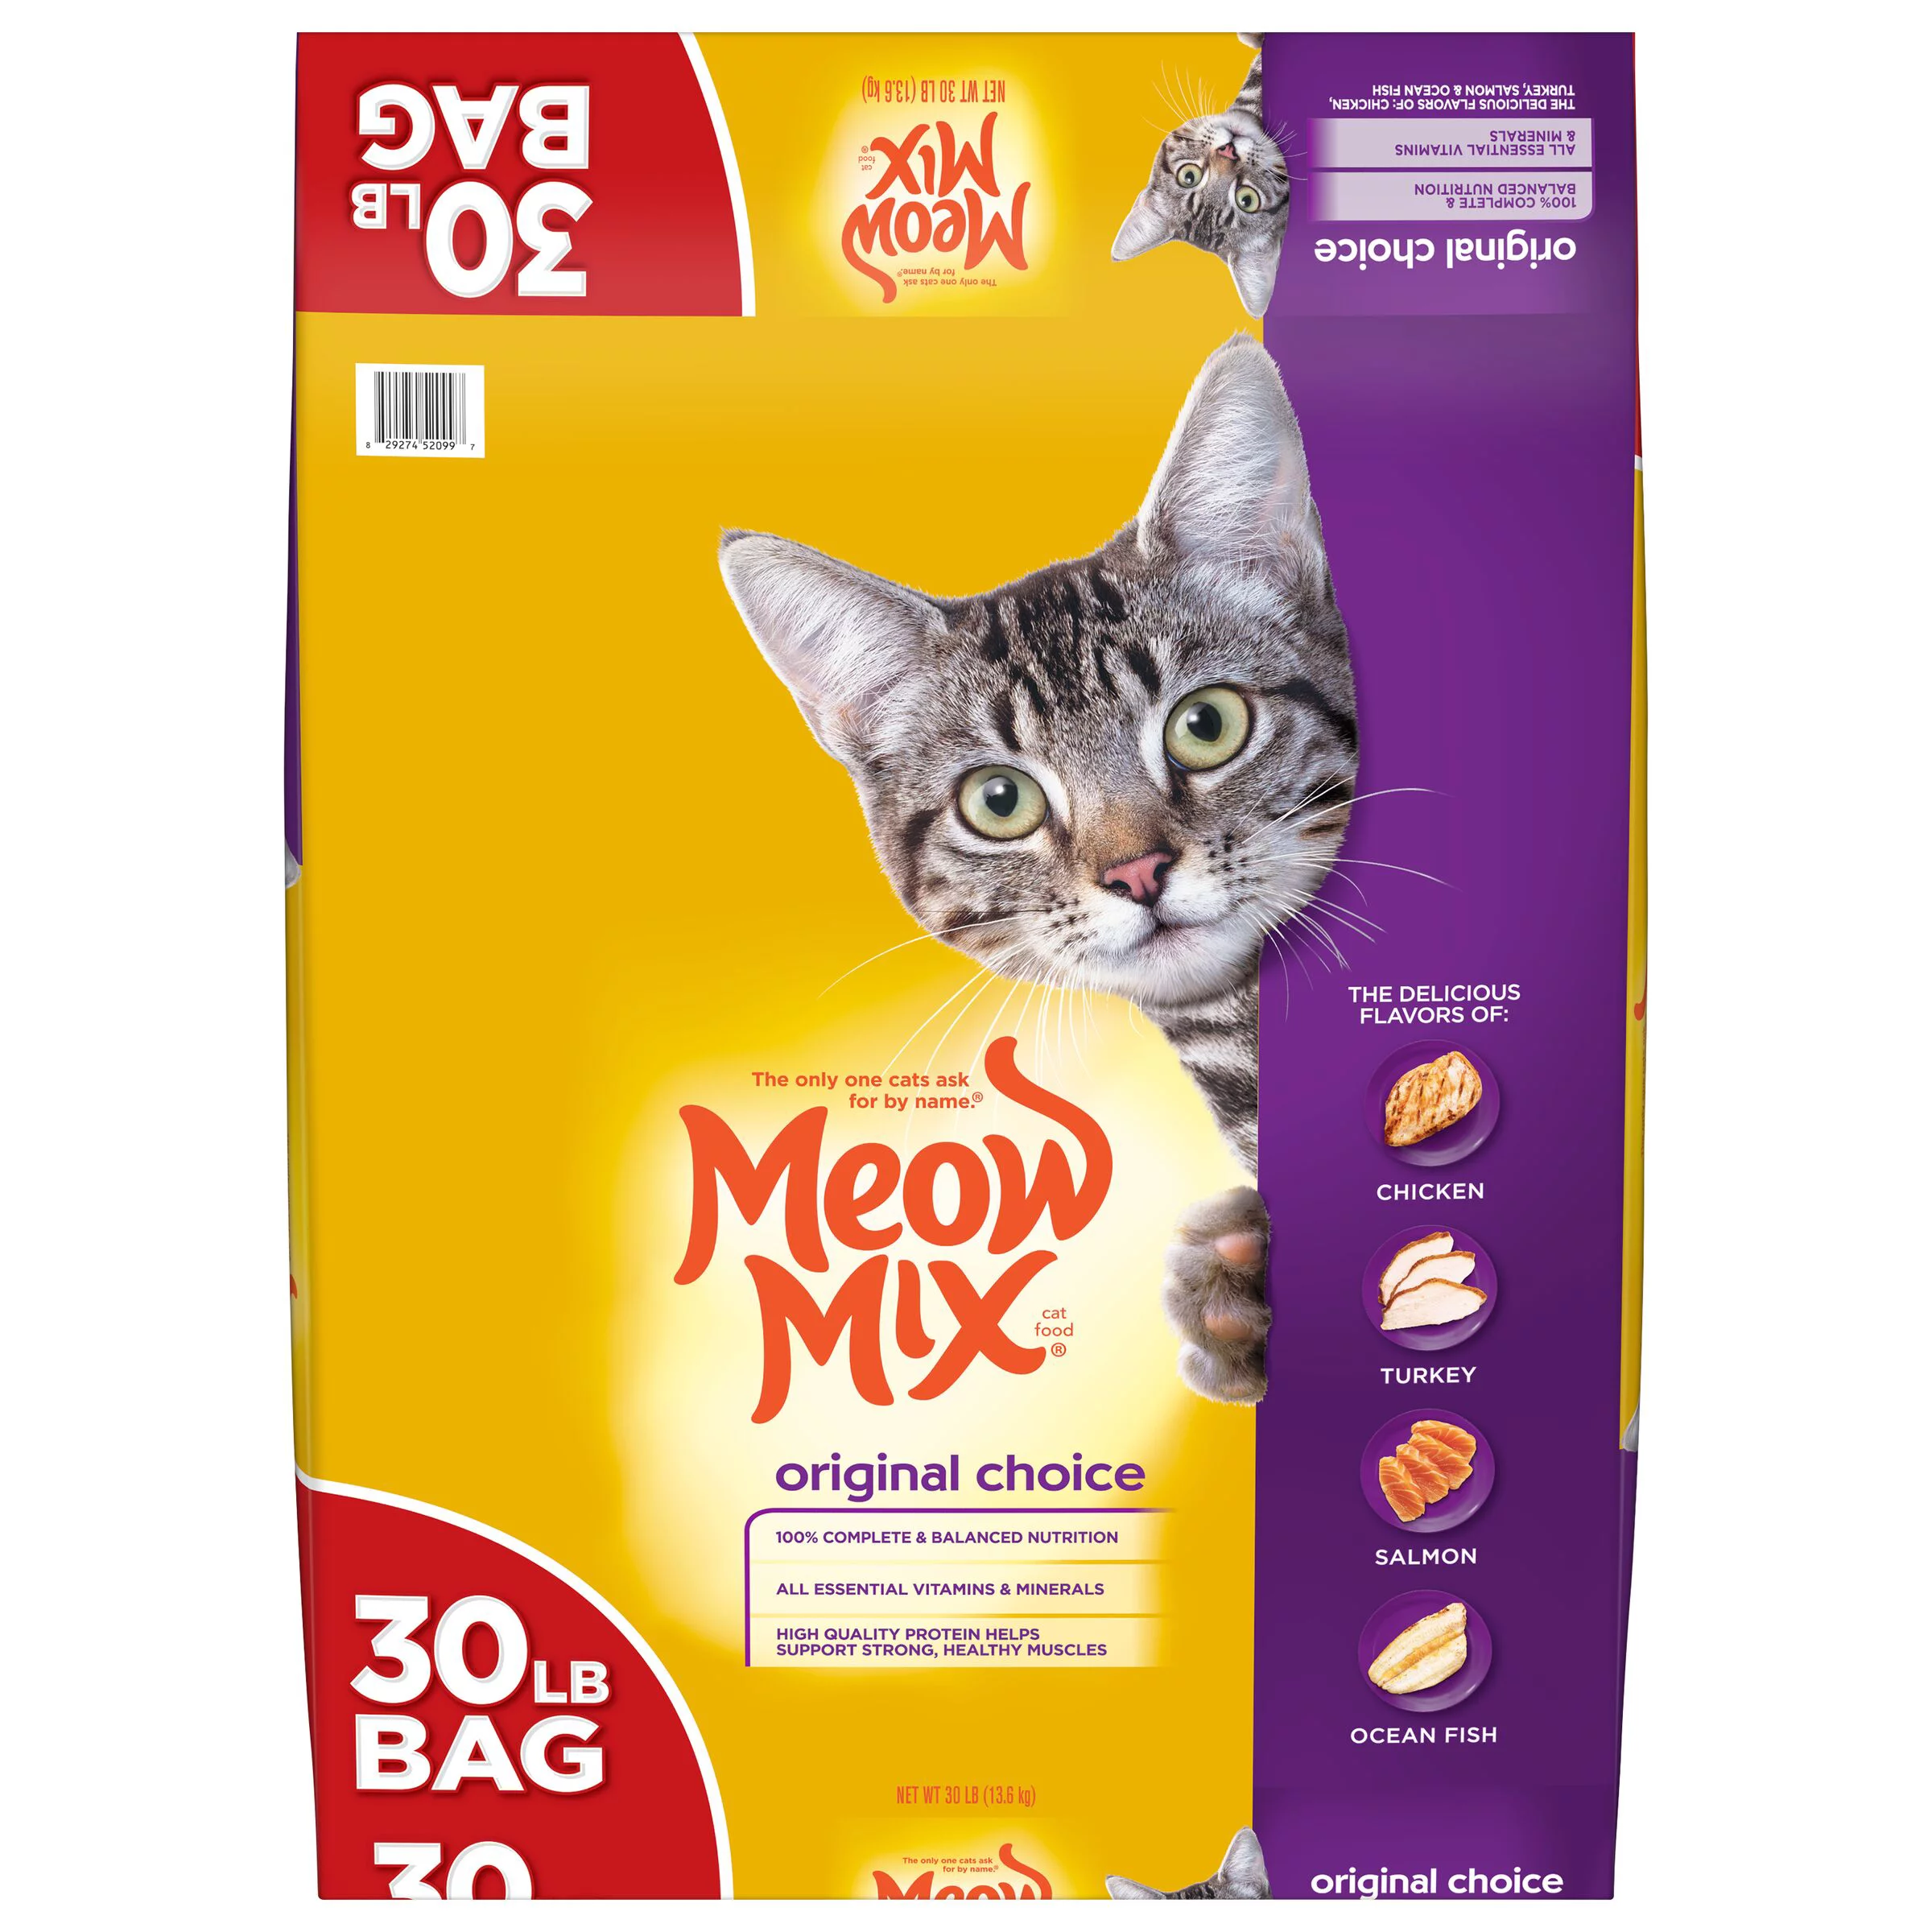 [Multiple Sizes] Meow Mix Original Choice Dry Cat Food